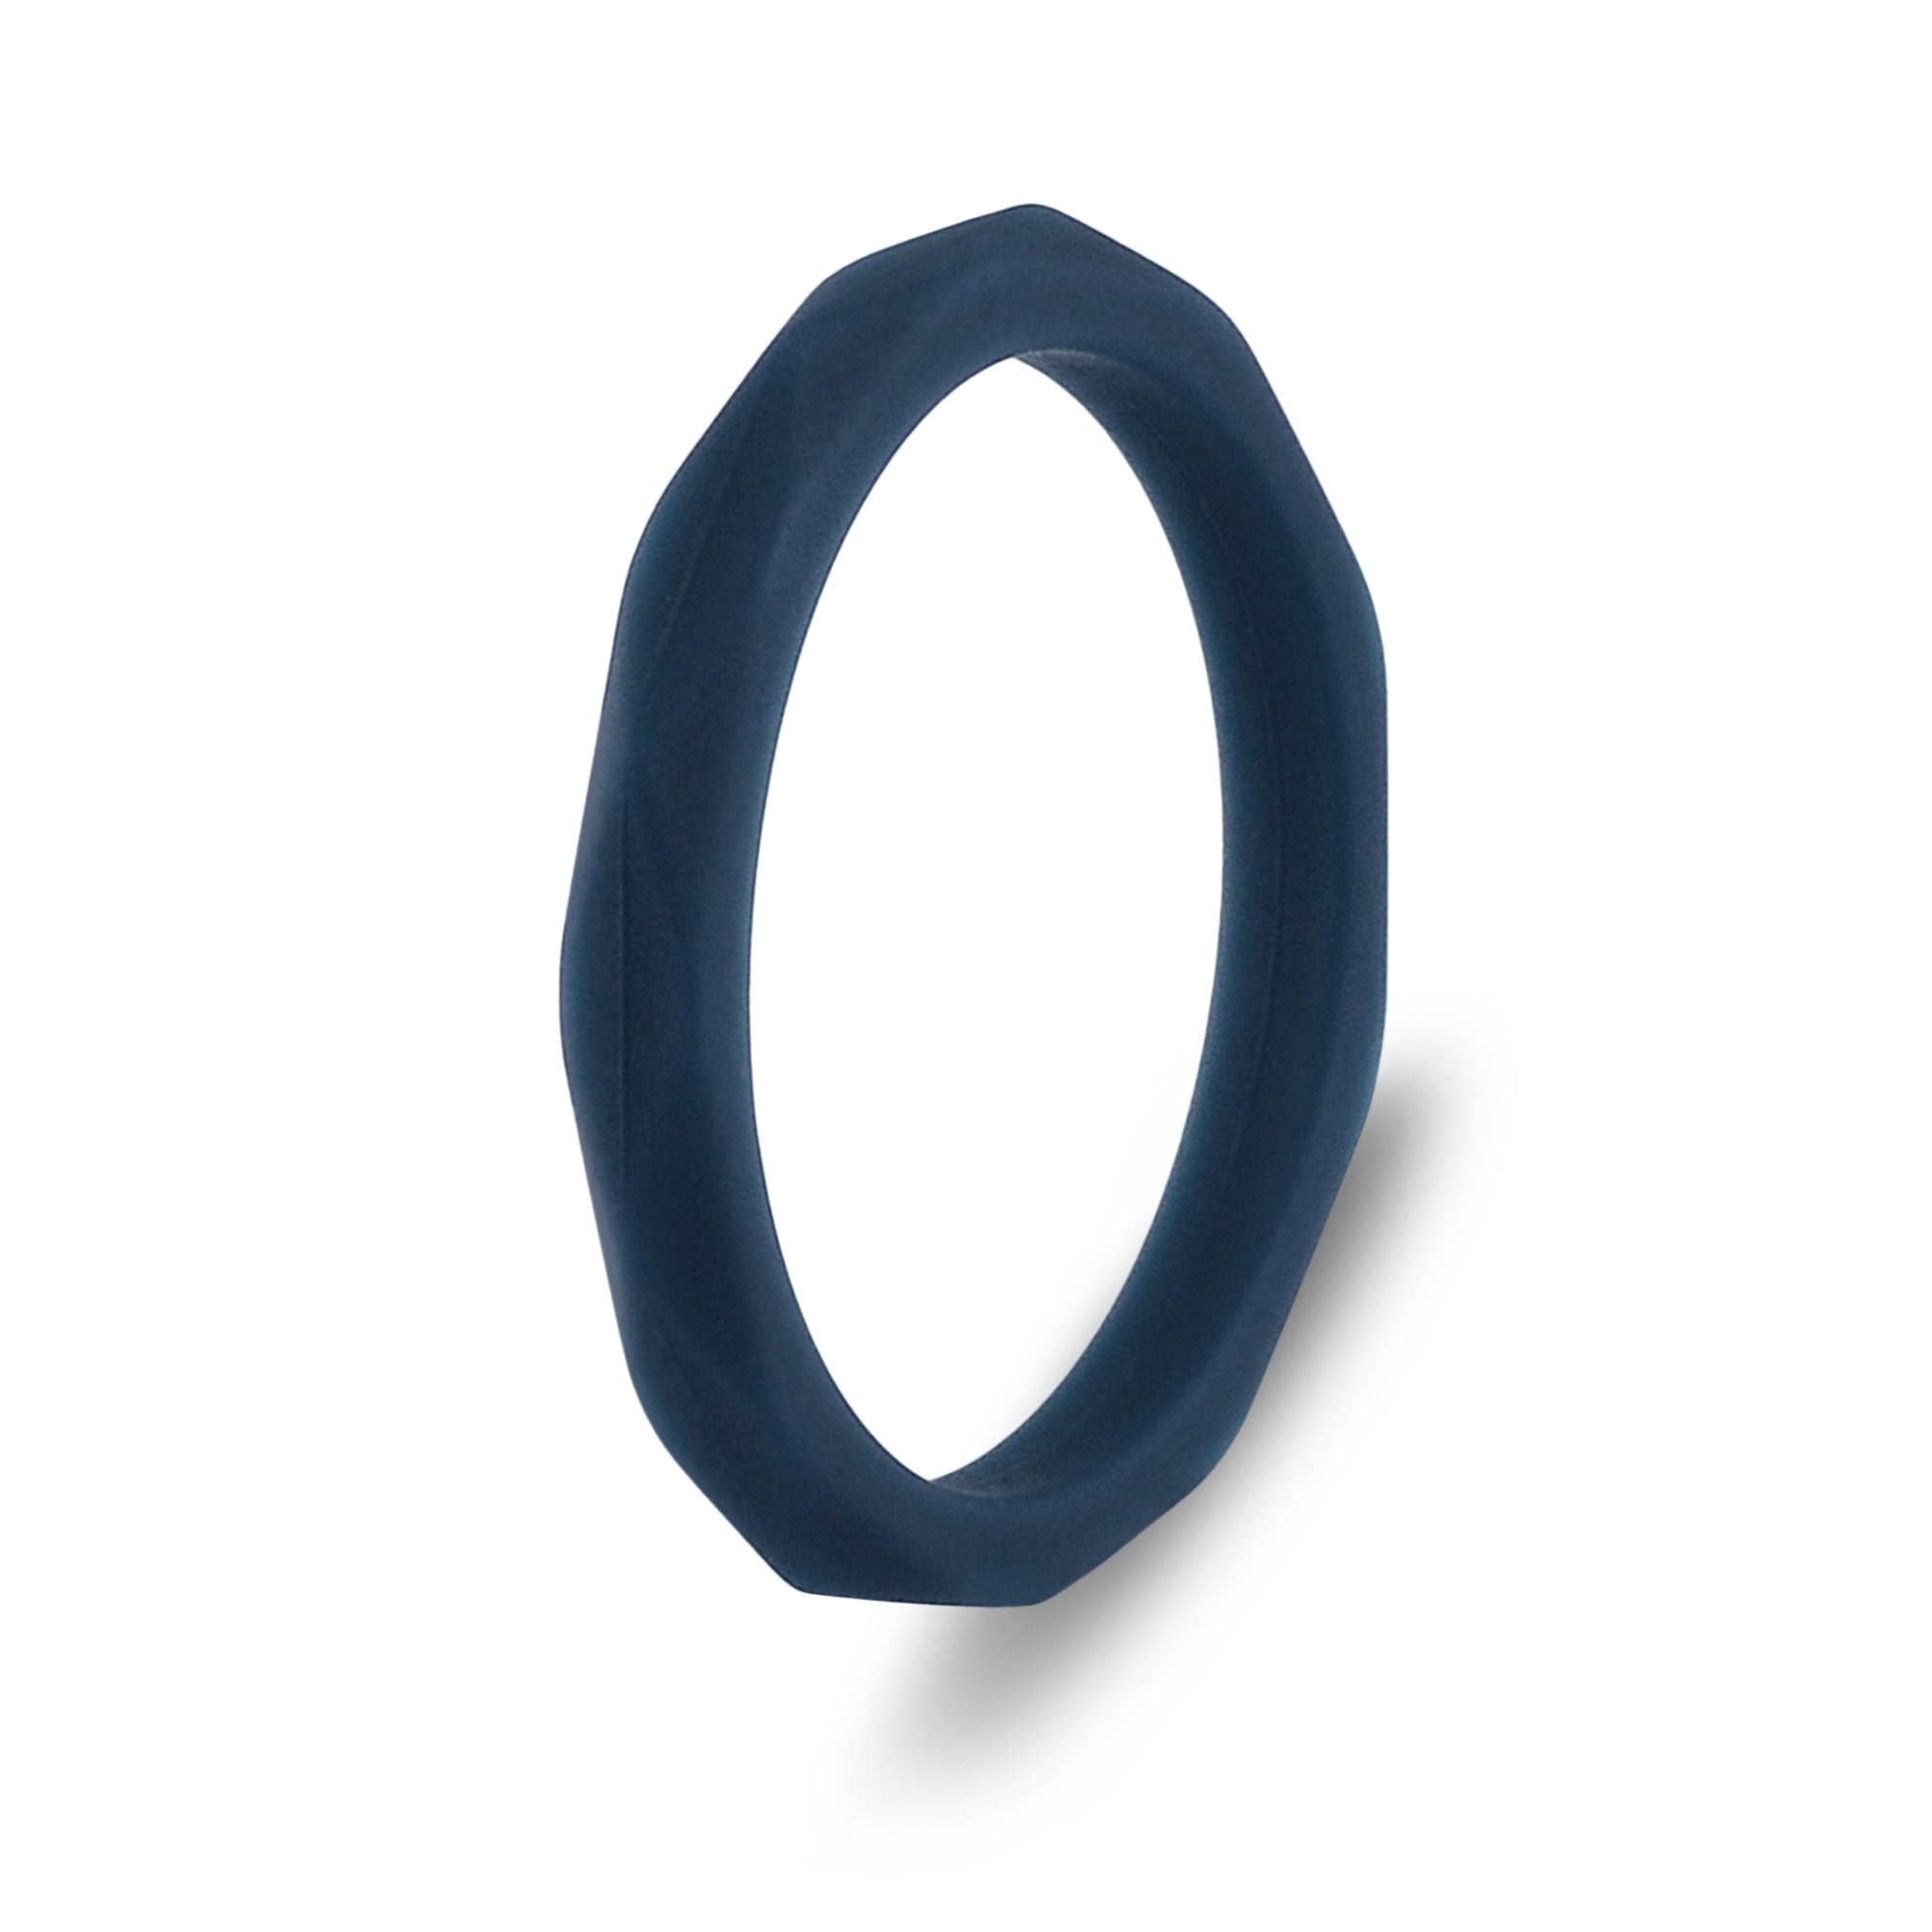 The Navy Lace - Silicone Ring